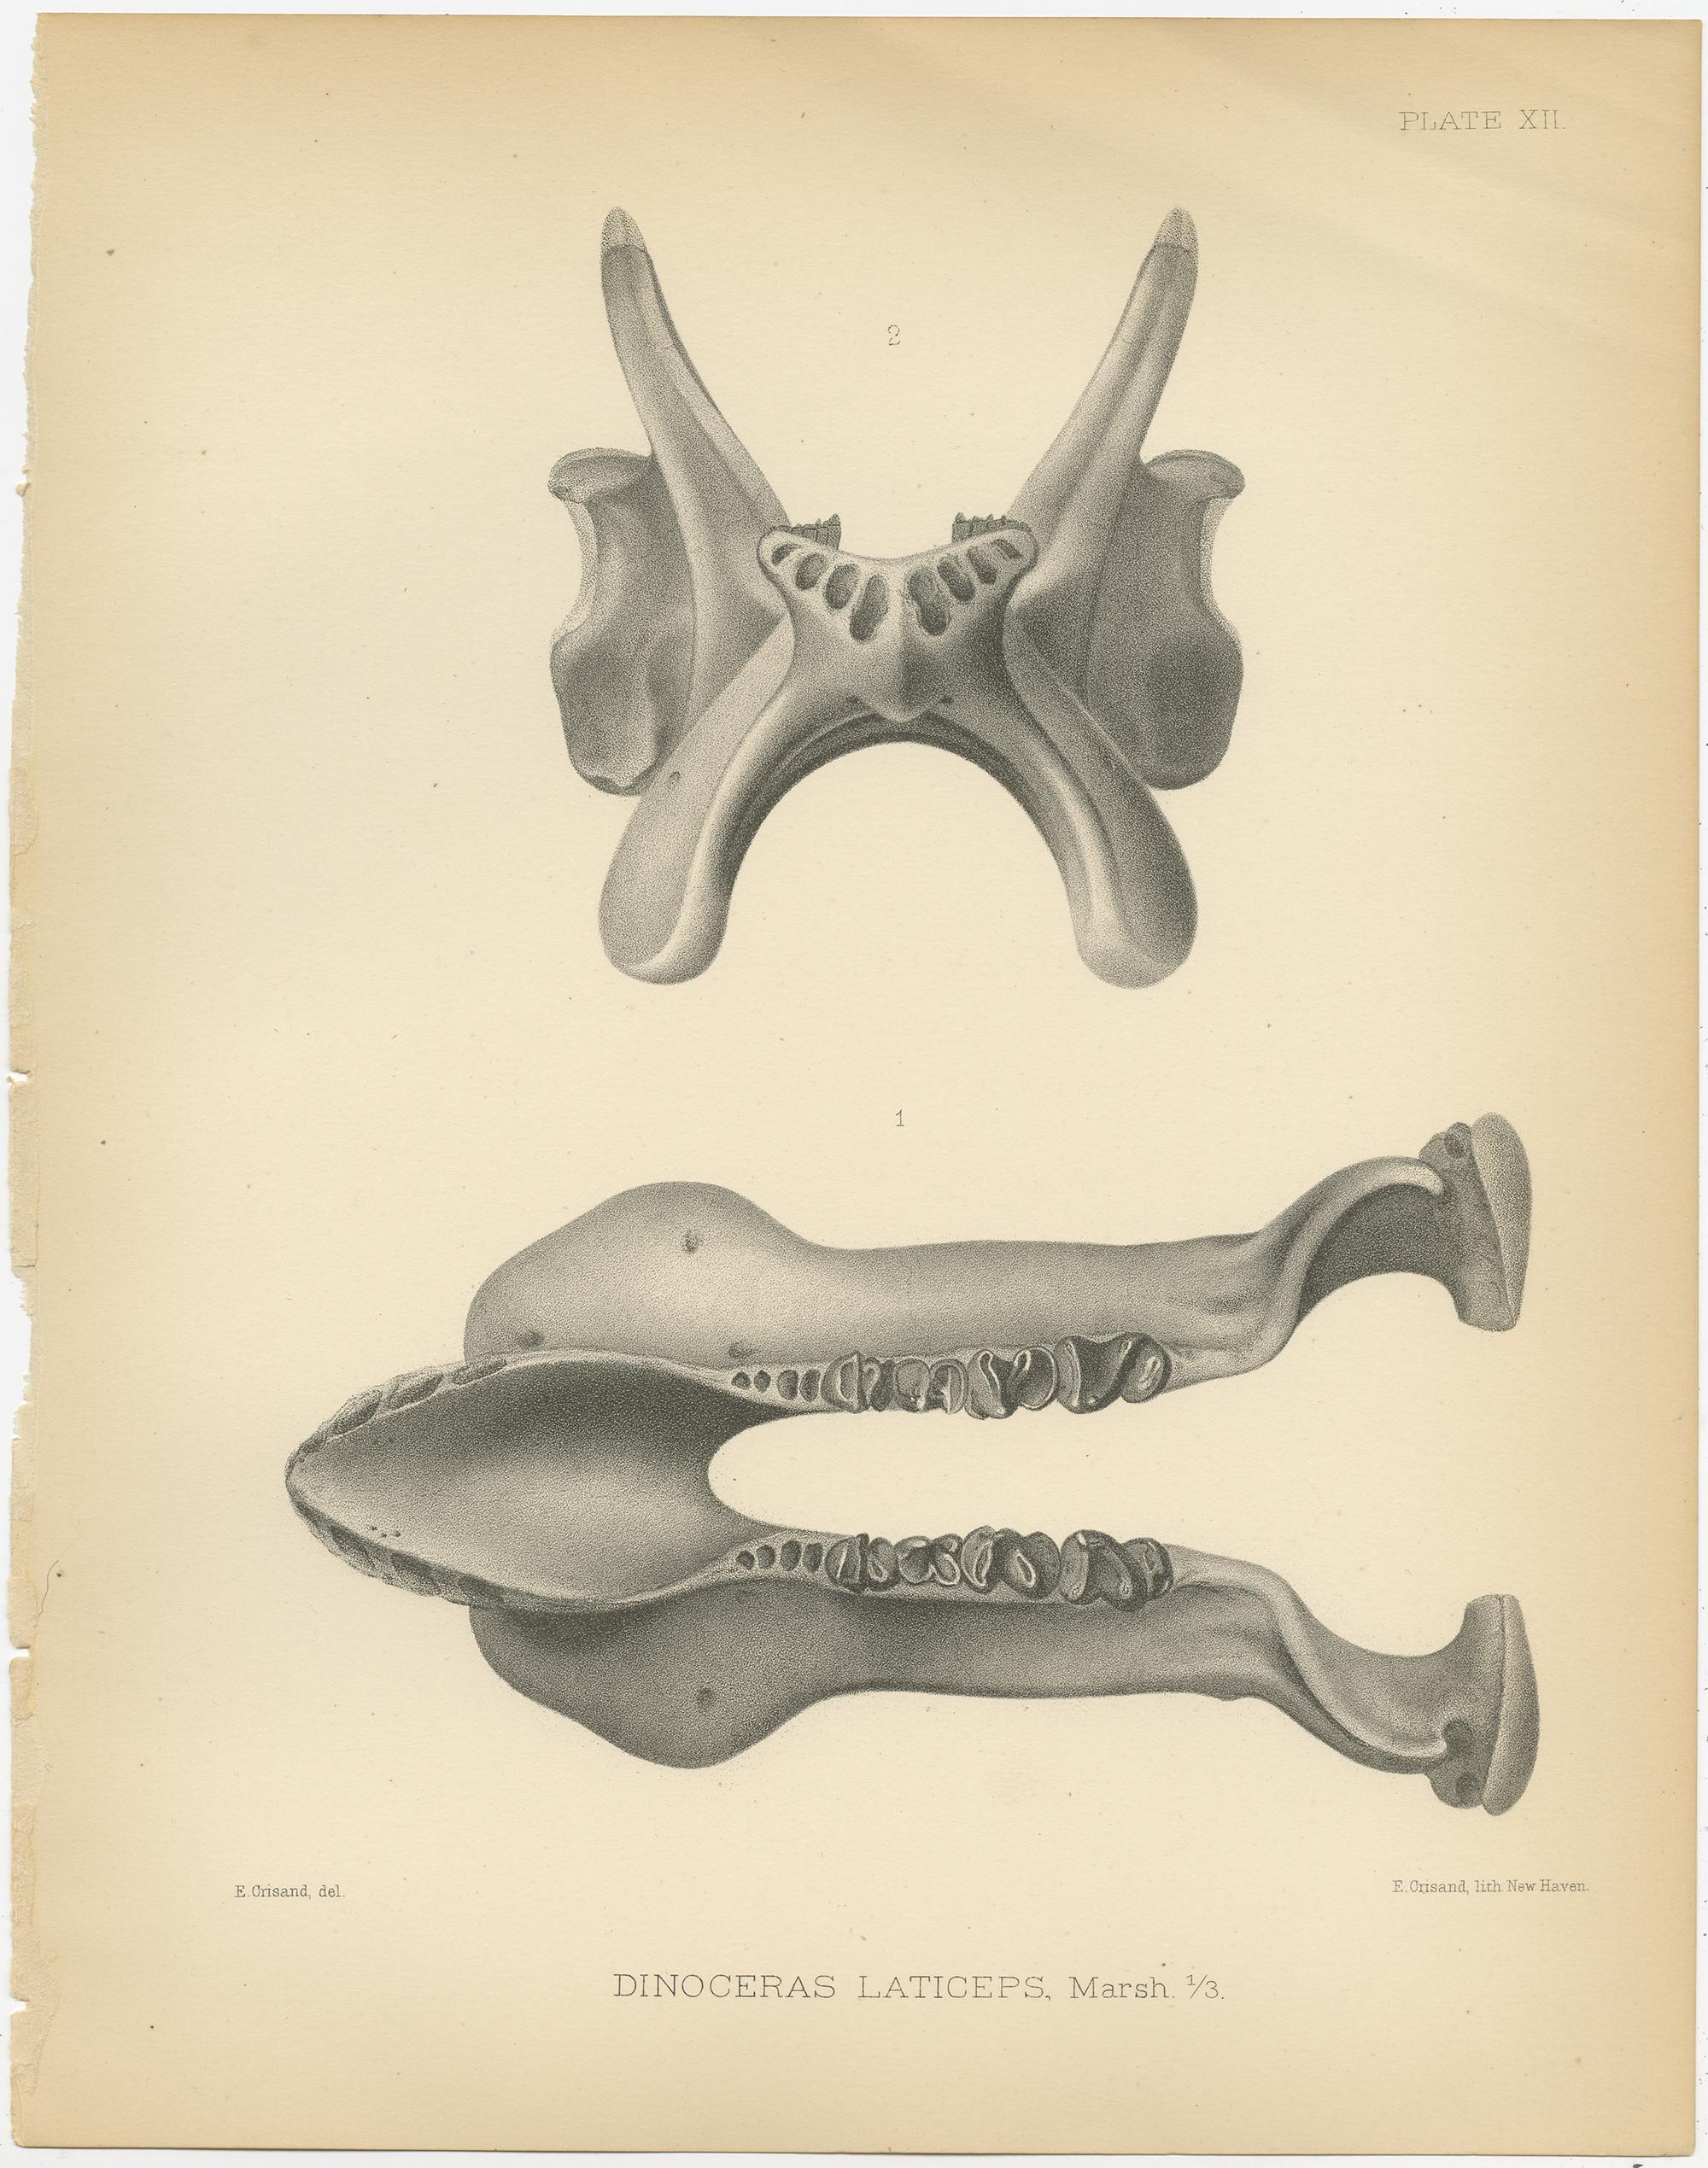 Set of two antique prints titled 'Dinoceras Laticeps'. Original lithograph of the lower jaw of a Dinoceras Laticeps, a large extinct mammal. This print originates from volume 10 of 'Monographs of the United States Geological Survey' by Othniel